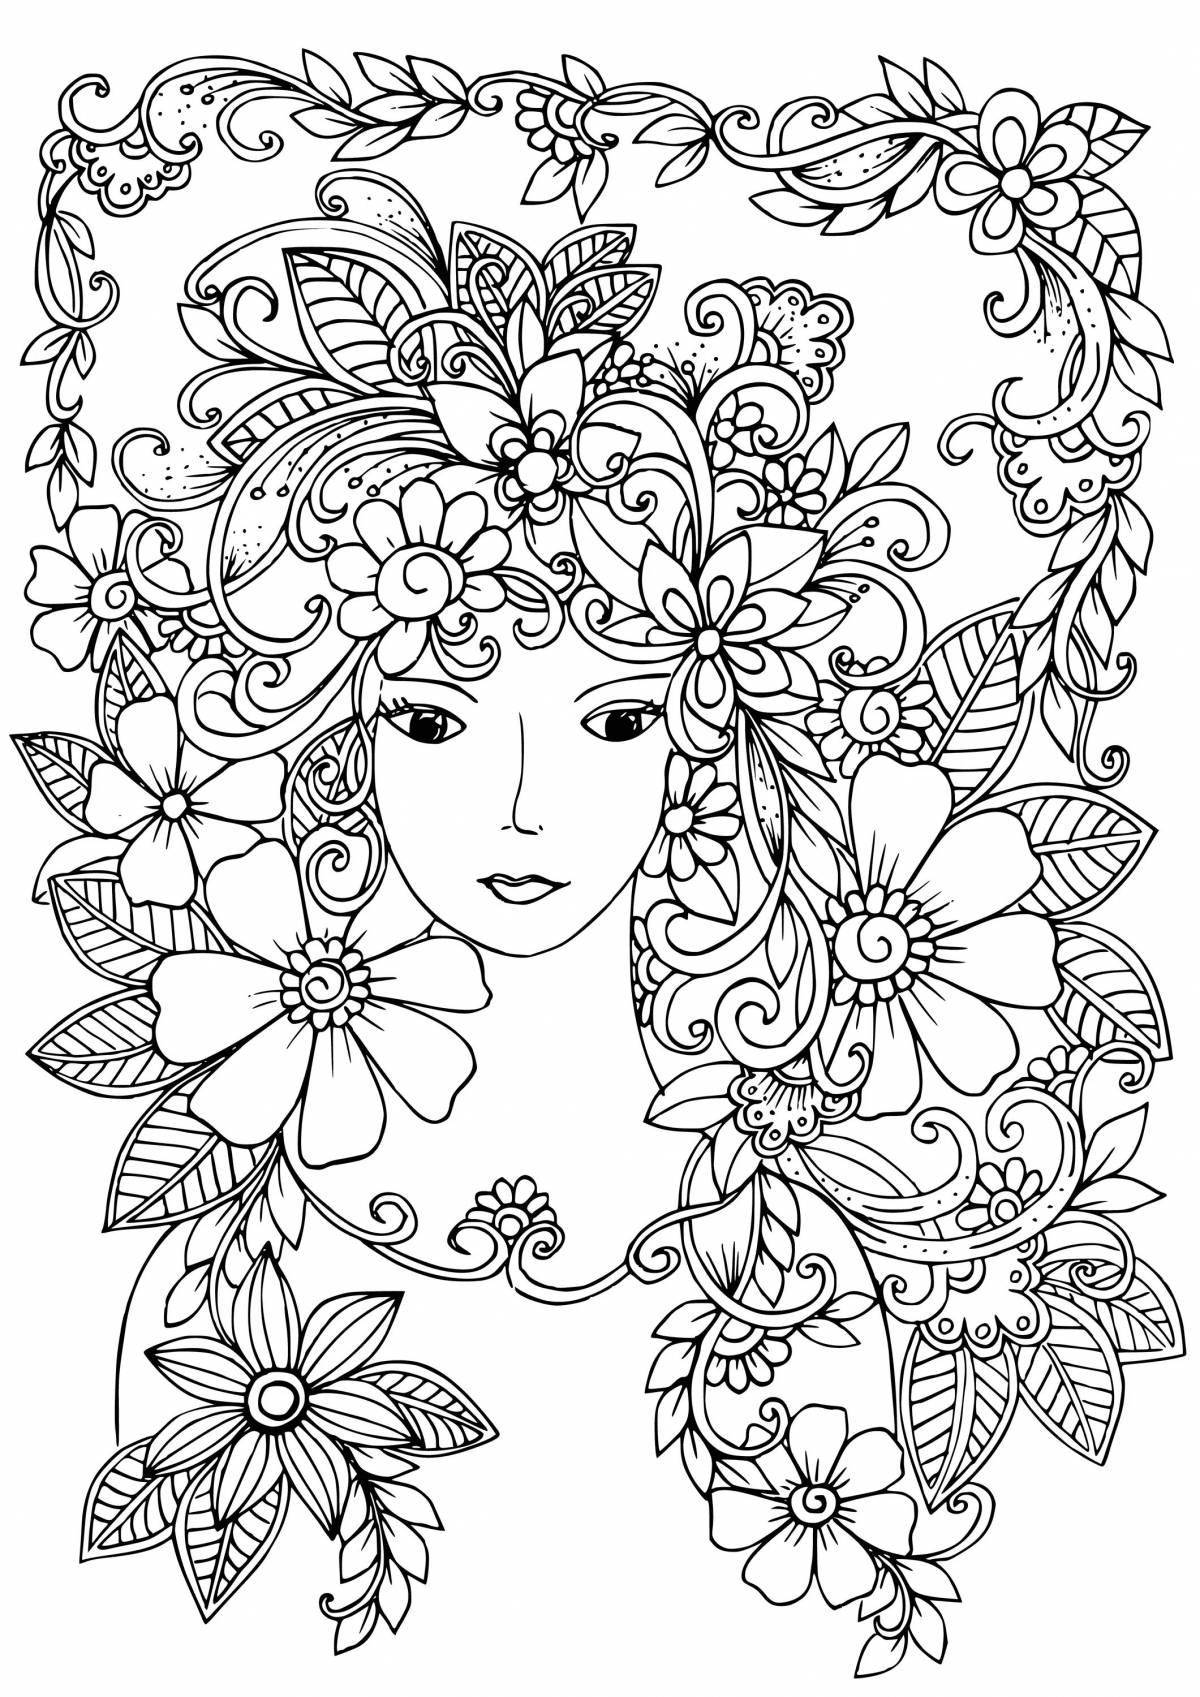 Fun coloring page heavy for girls